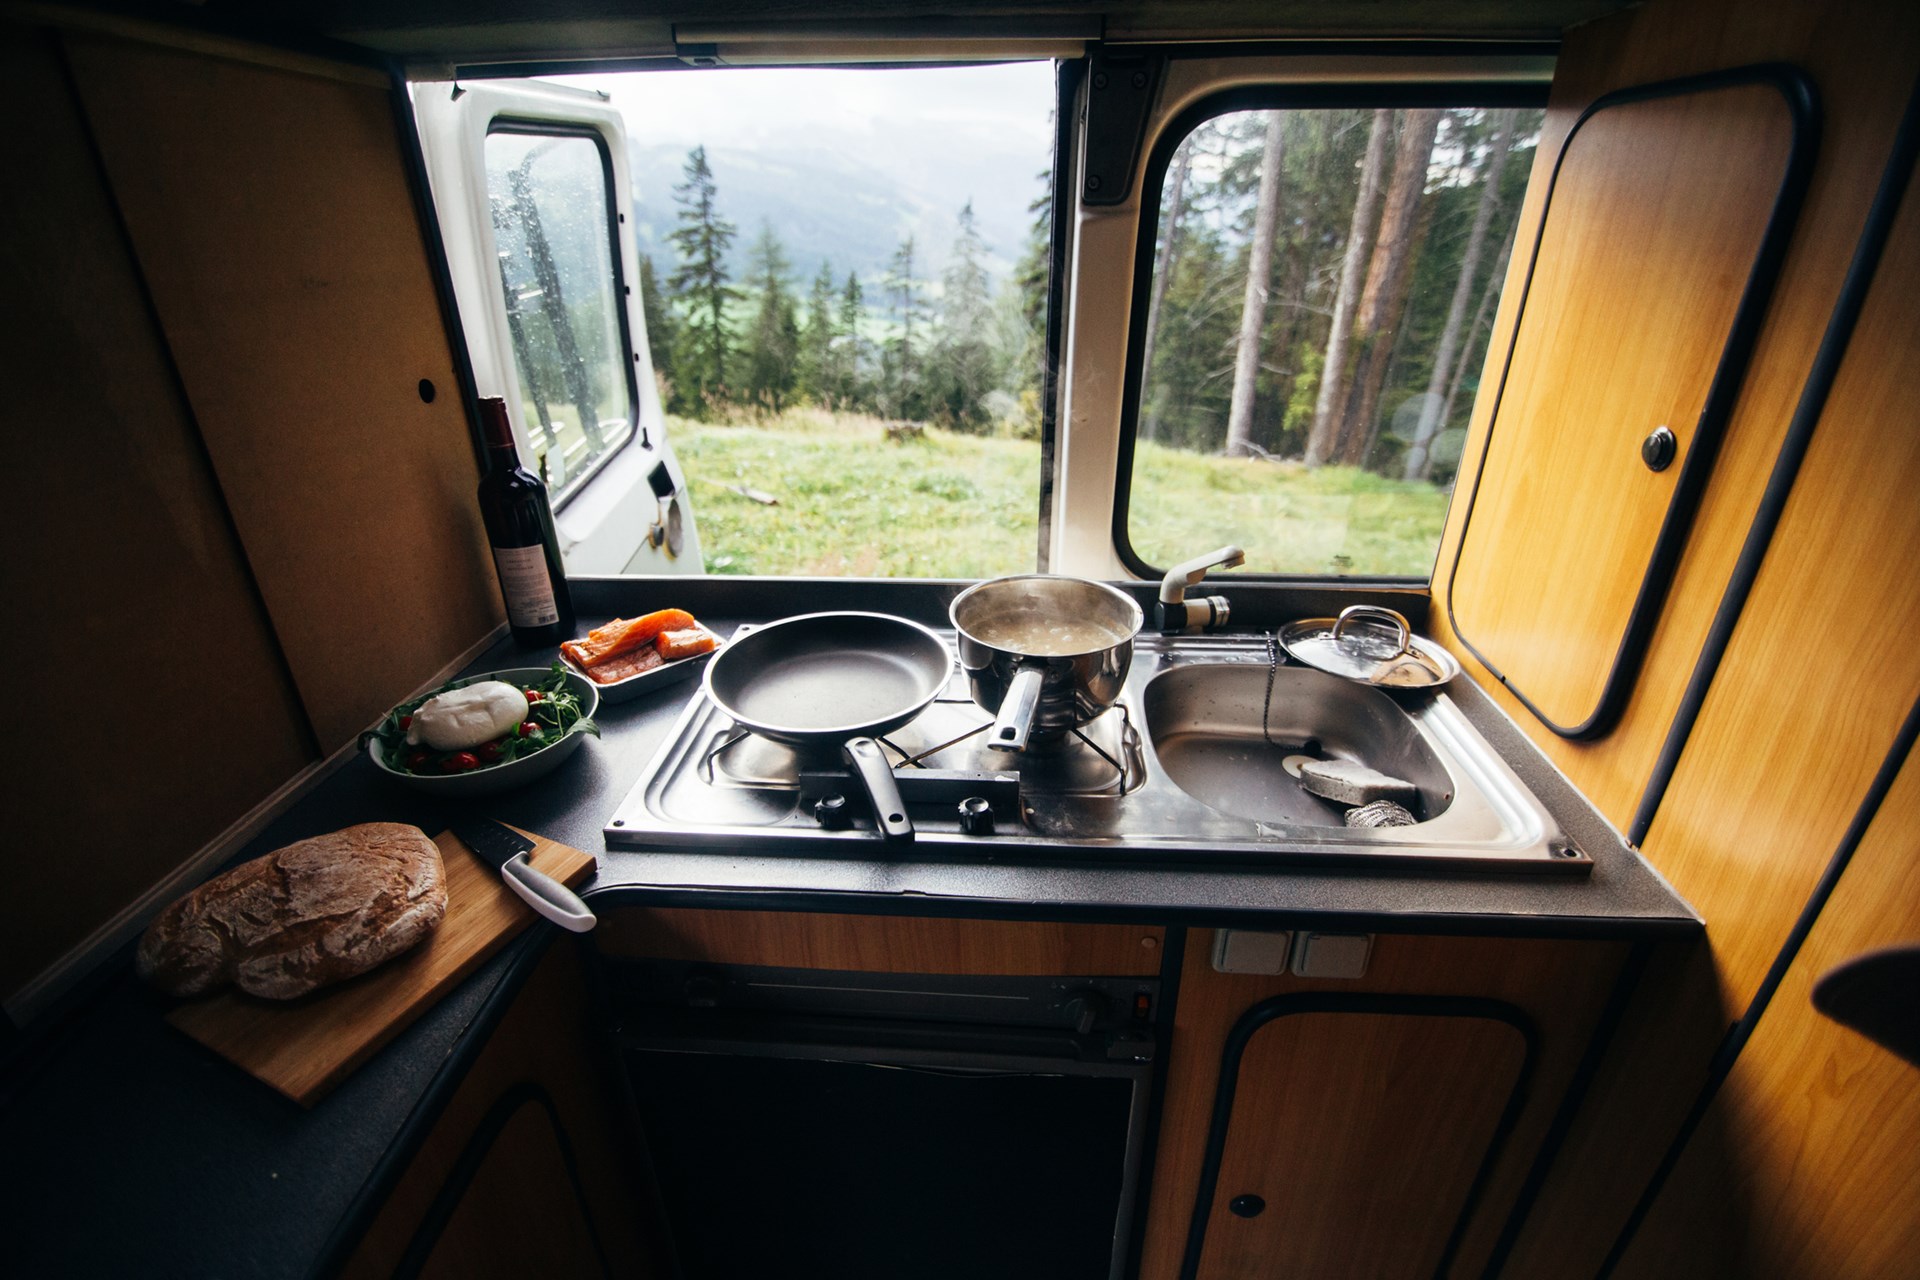 5 RV Cooking Tips To Make The Most of Your Small Kitchen - The